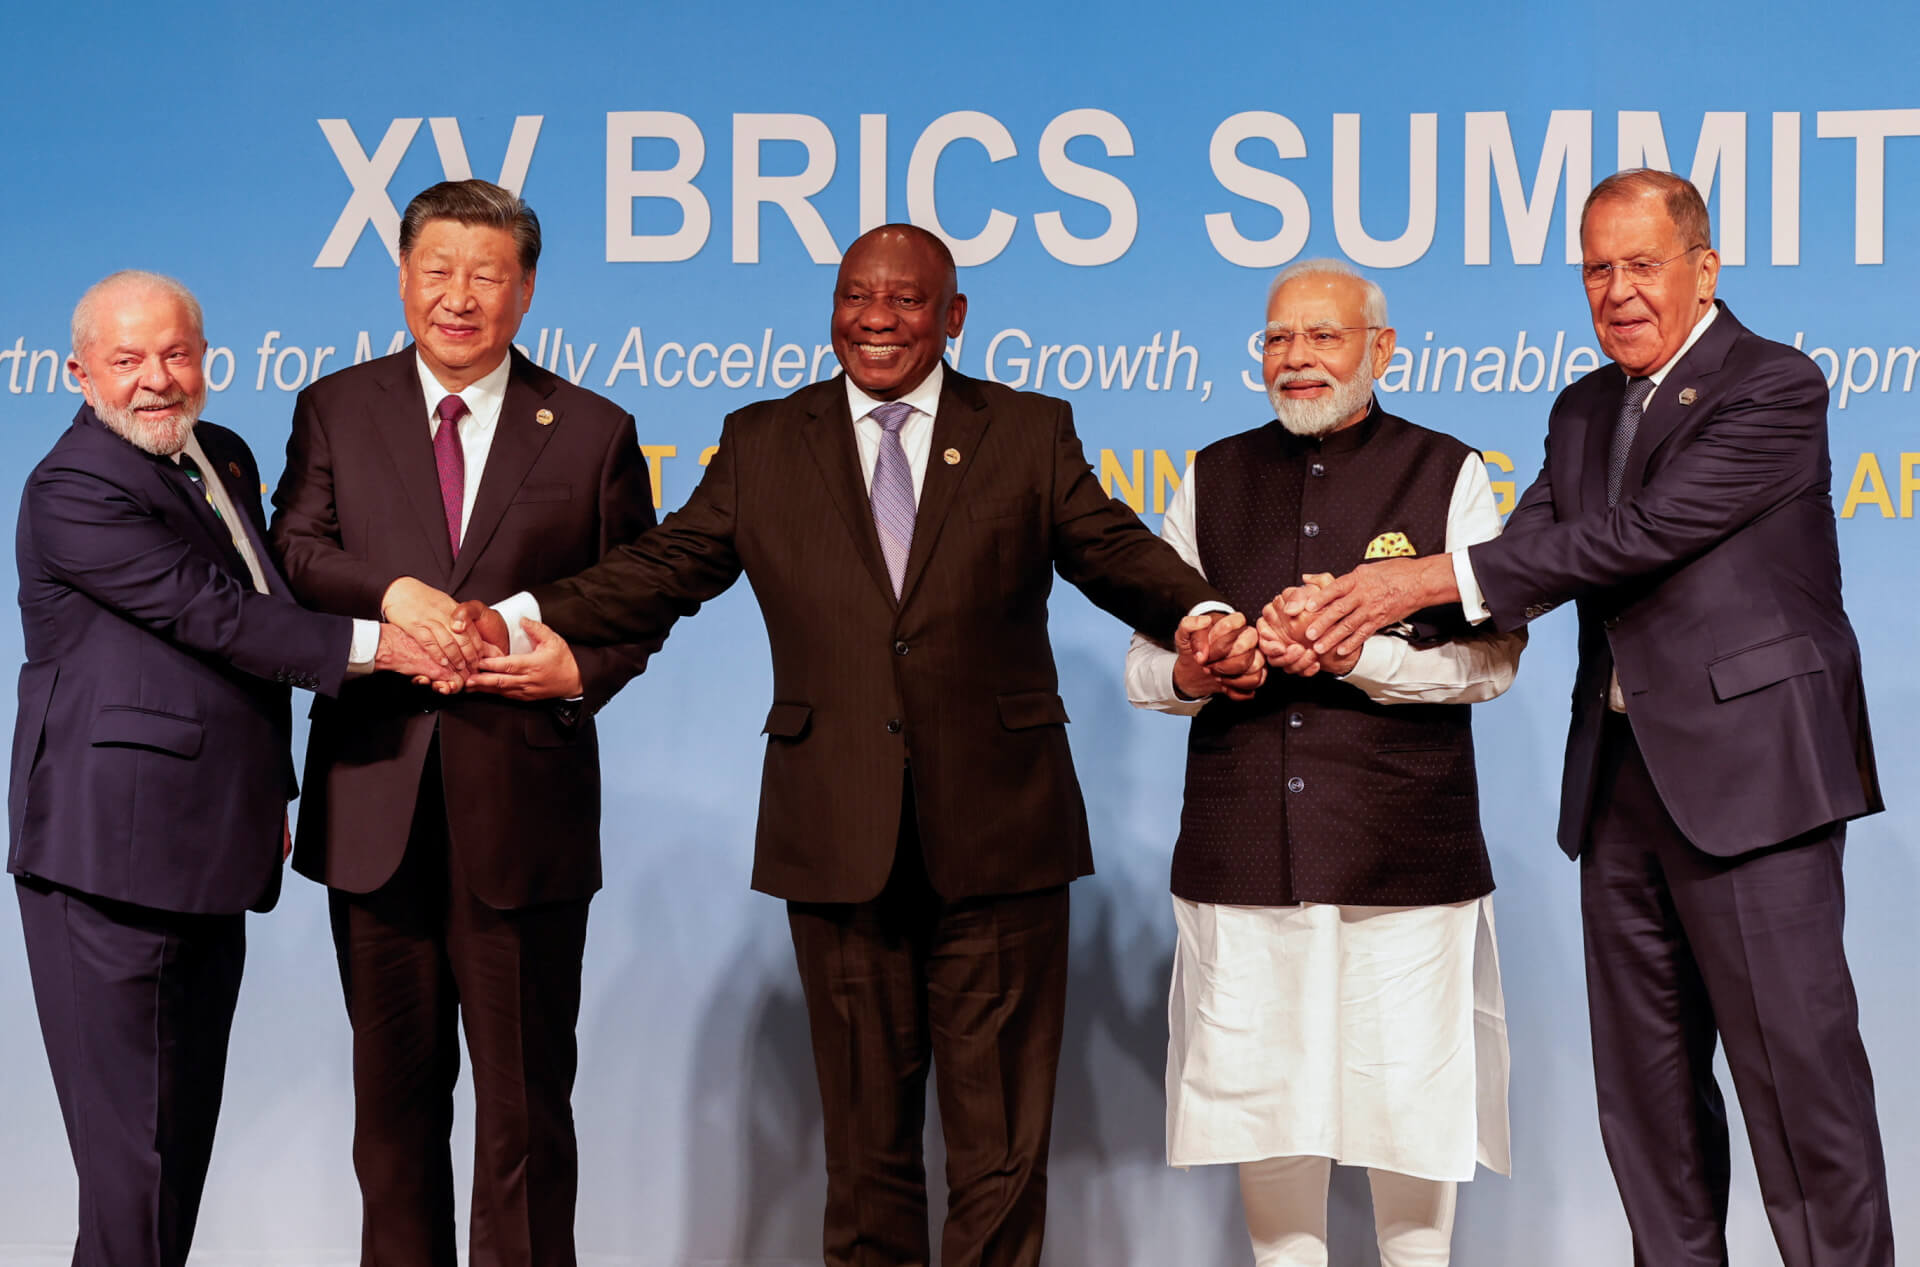 “India Fully Supports the Expansion of the BRICS Membership”: PM Modi at Johannesburg Summit